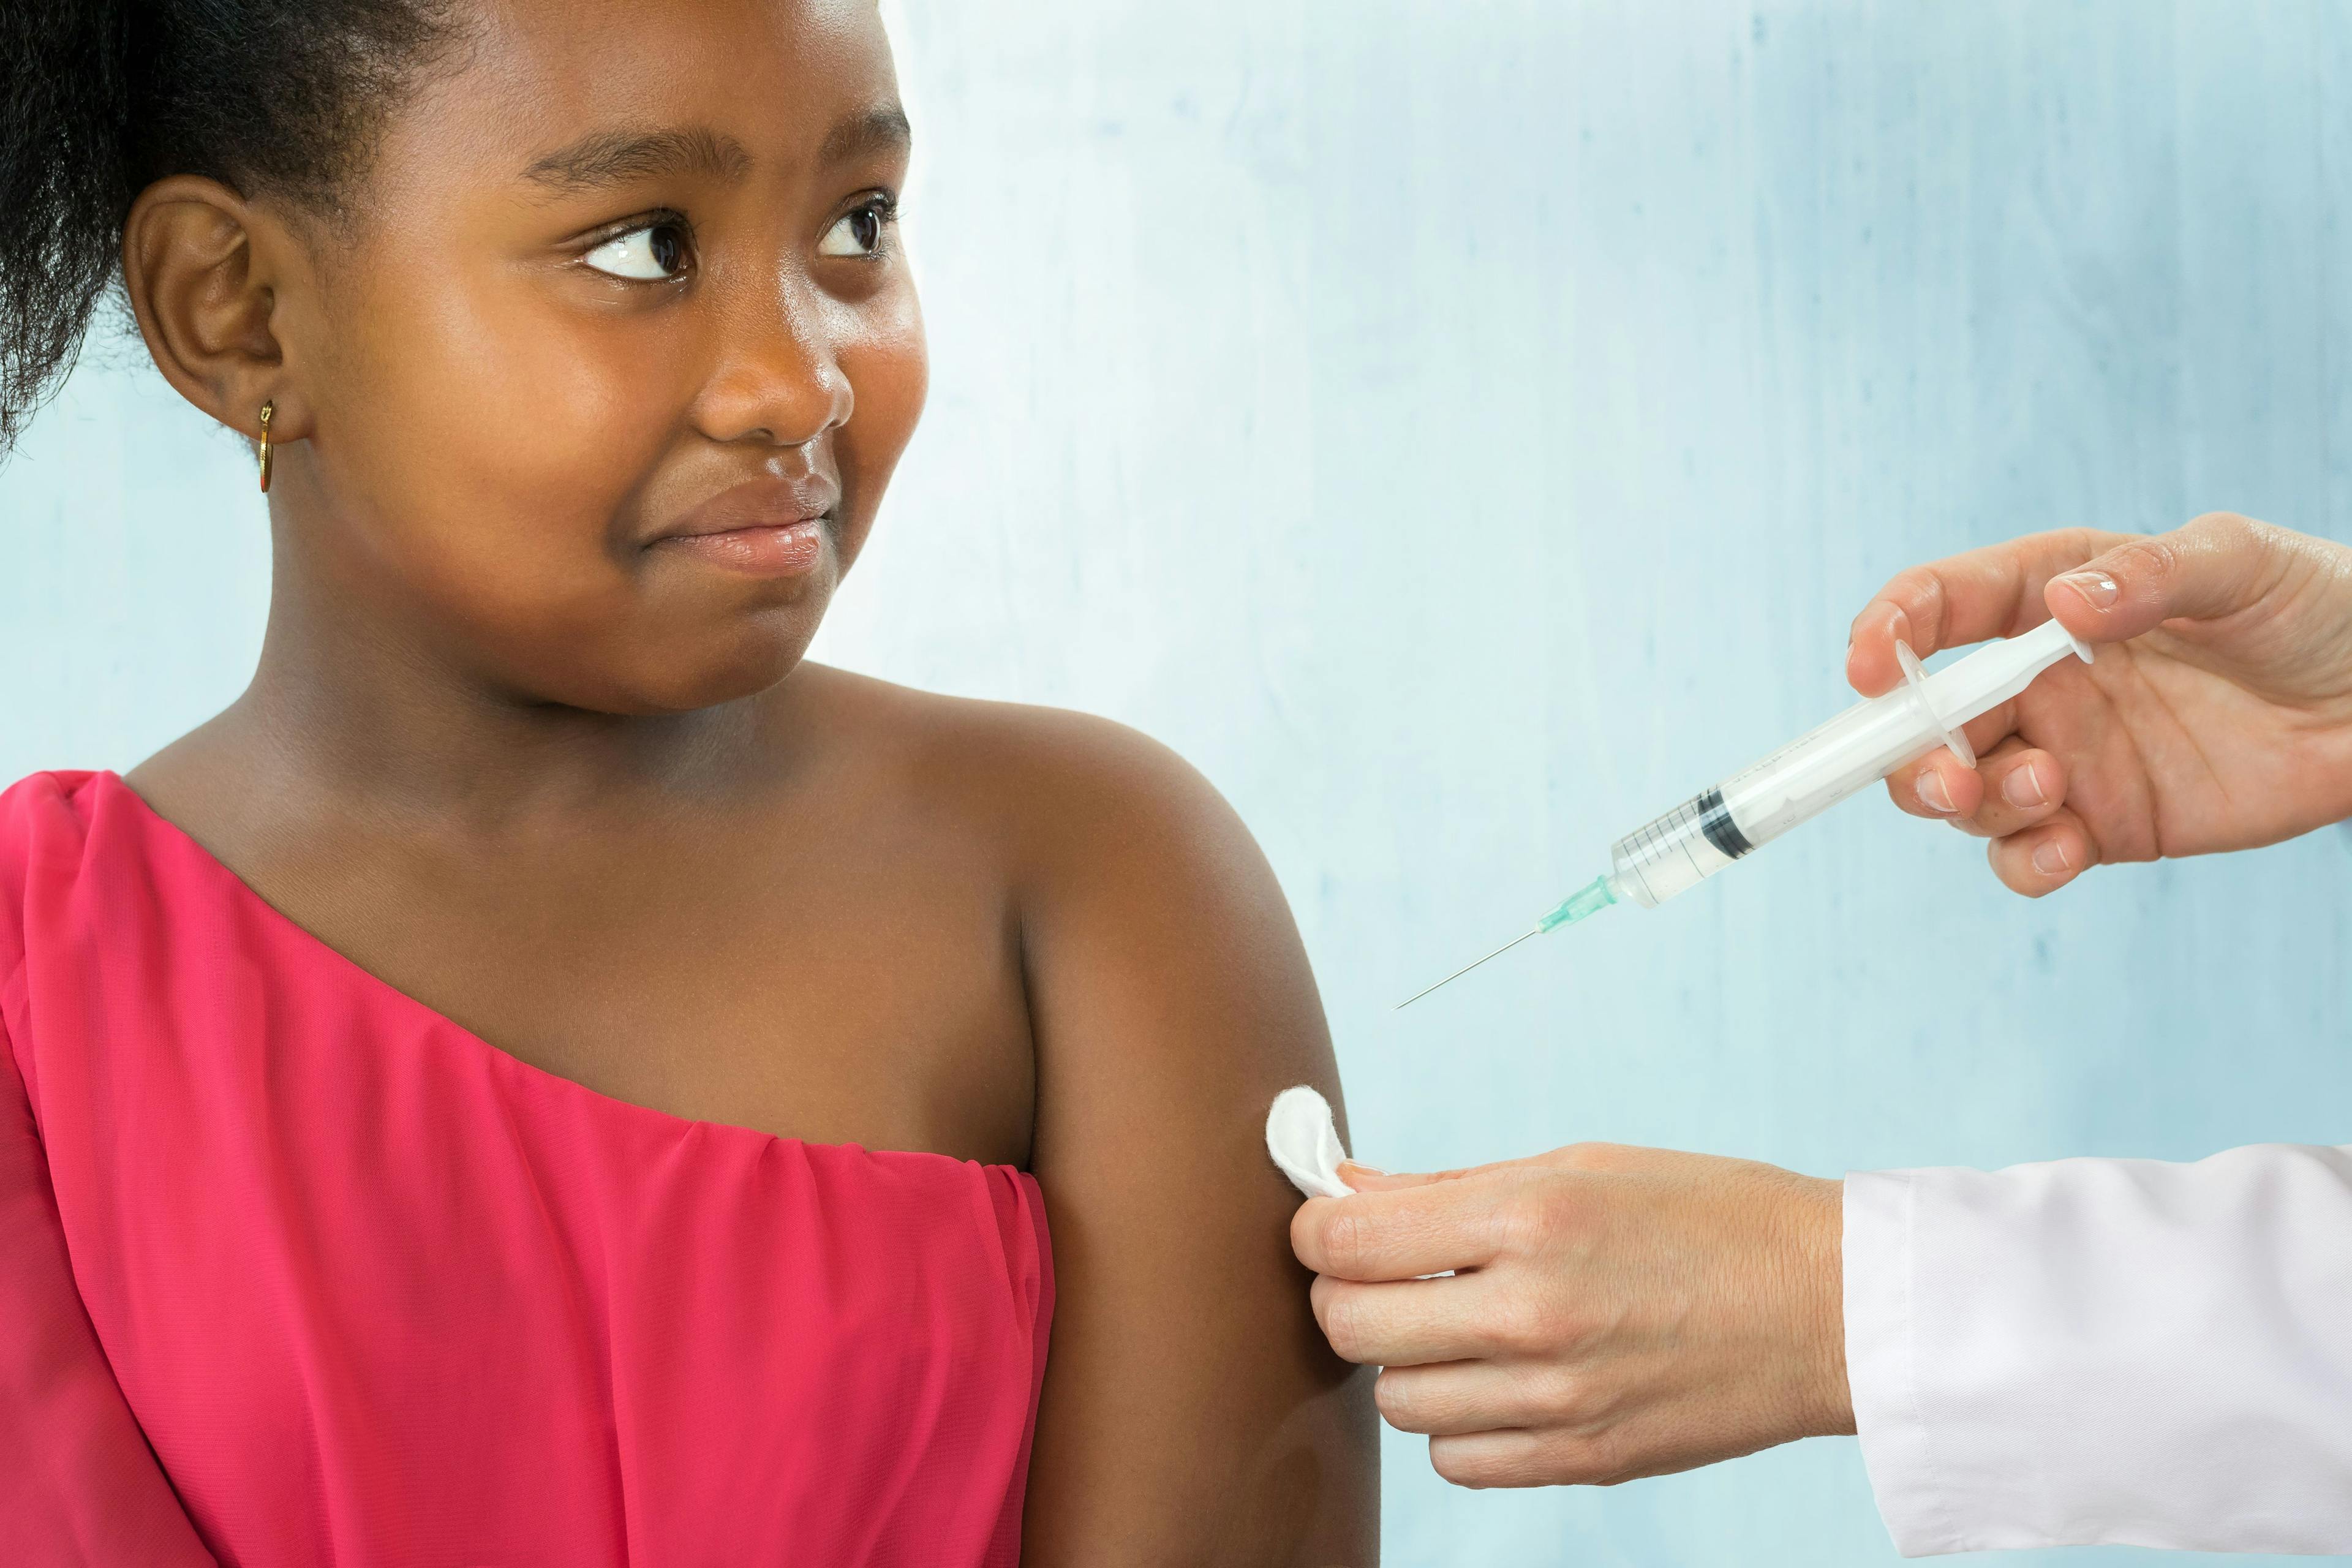 Loosening Restrictions on Pharmacists Could Help Raise Children’s Vaccination Rates